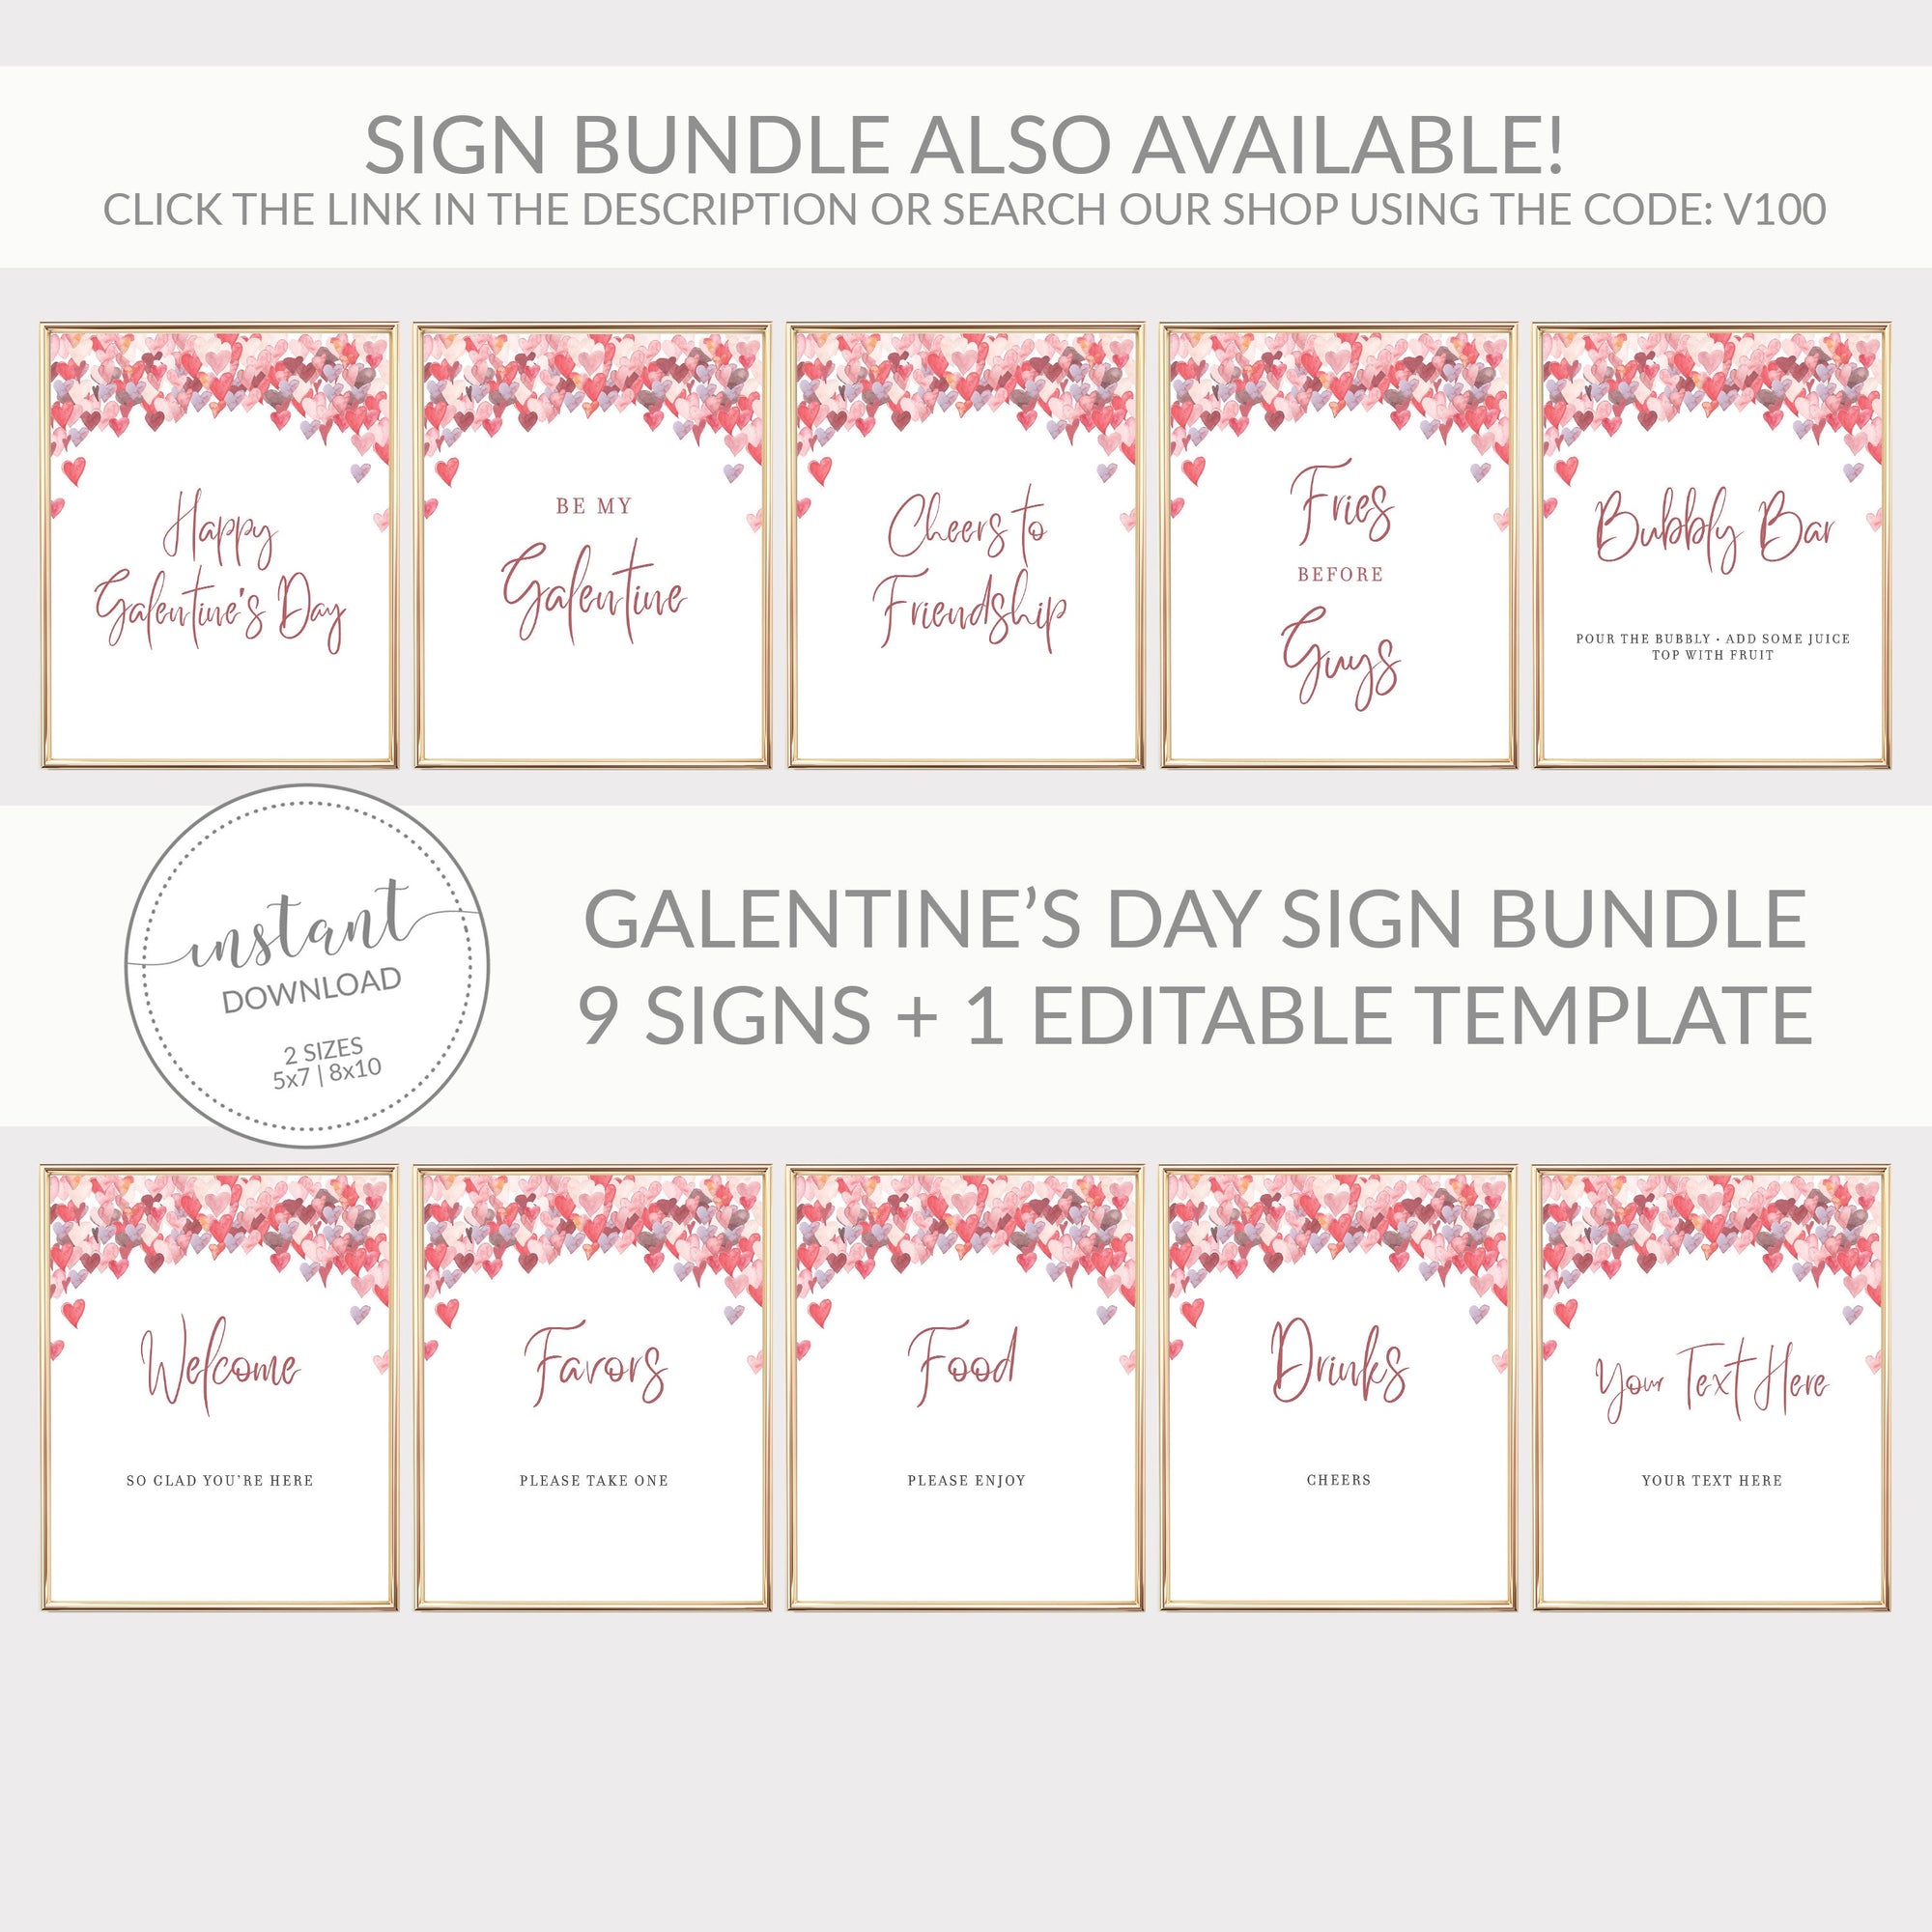 Fries Before Guys Sign Printable, Galentines Day Decor, Galentines Day Party Decorations, Galentines Party Sign, INSTANT DOWNLOAD - VH100